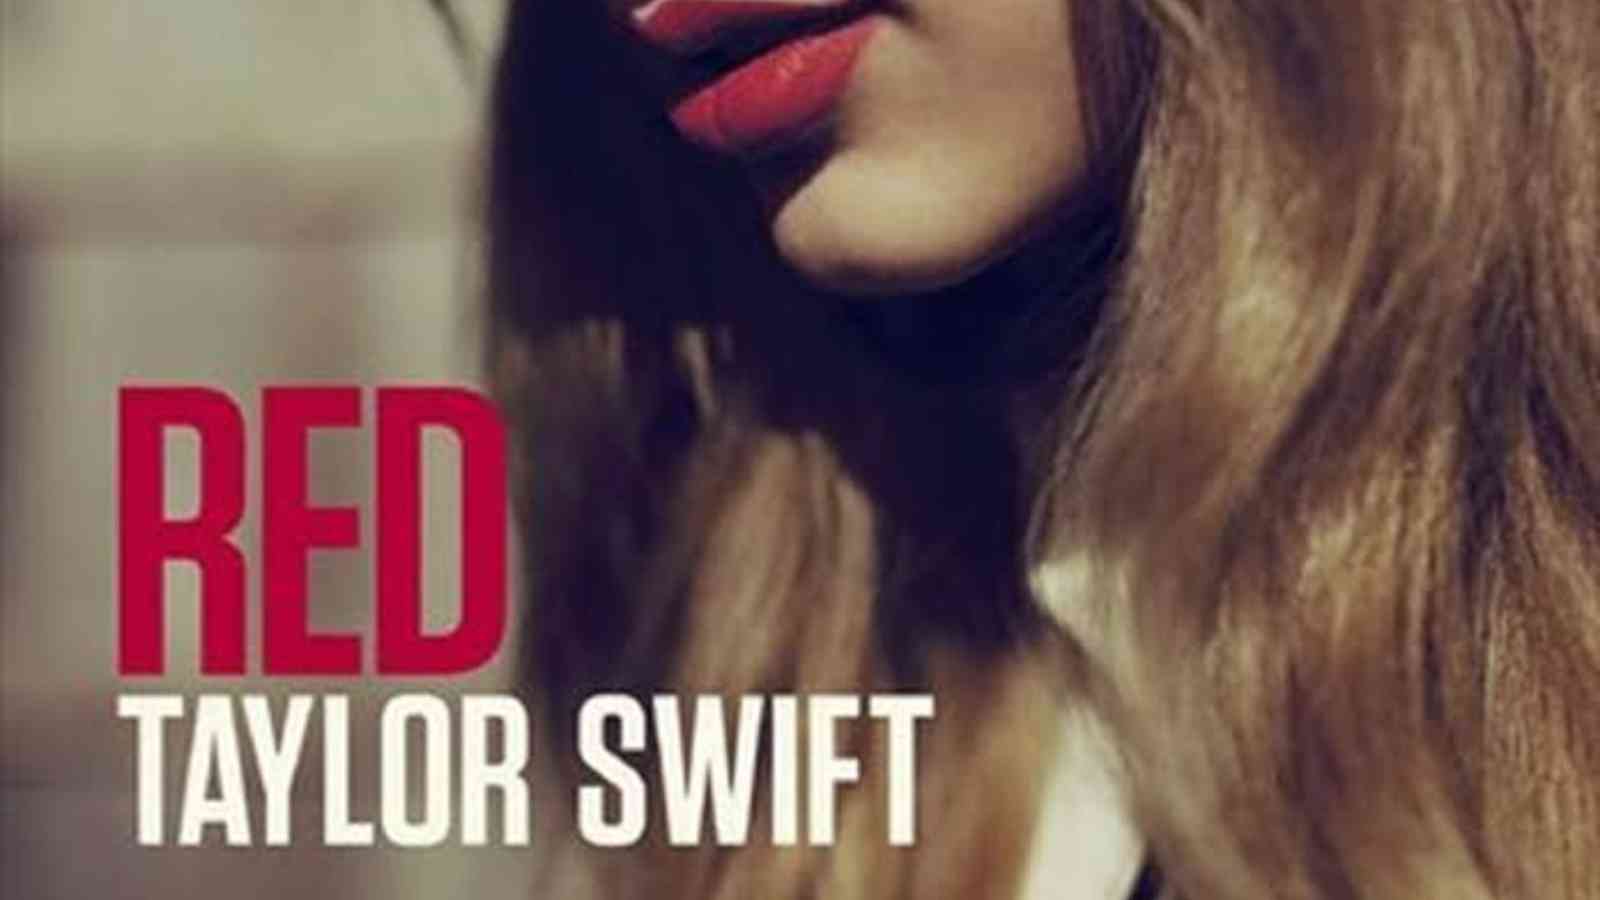 Taylor Swift's Red